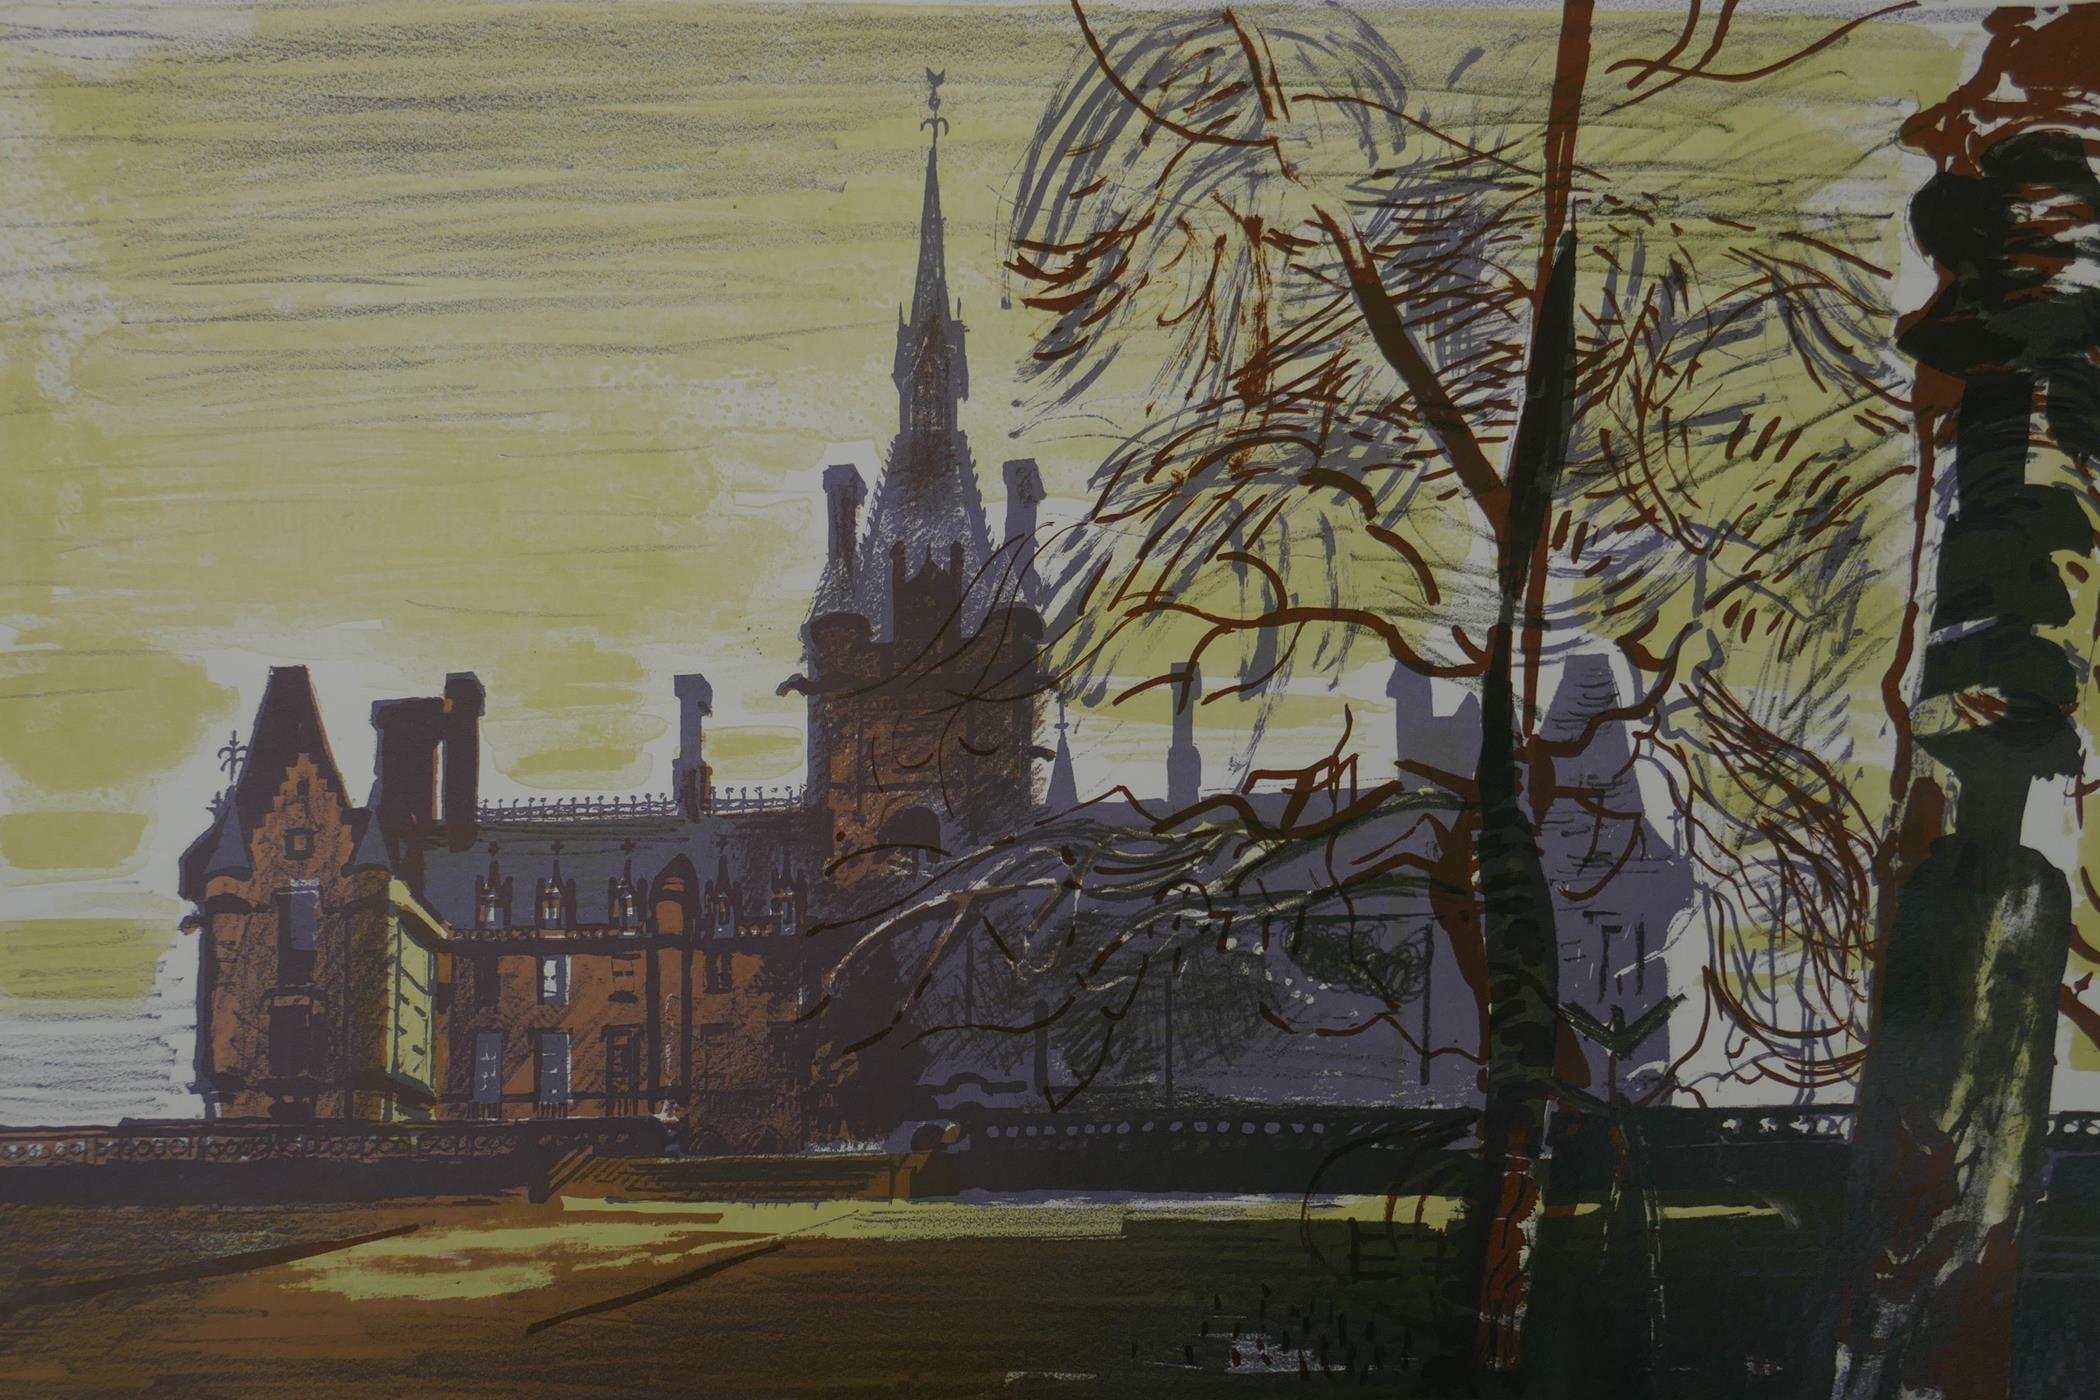 'Fettes', signed Edwin Ladell, and a wooded path by dwellings, signed J. Ramsden, both unframed